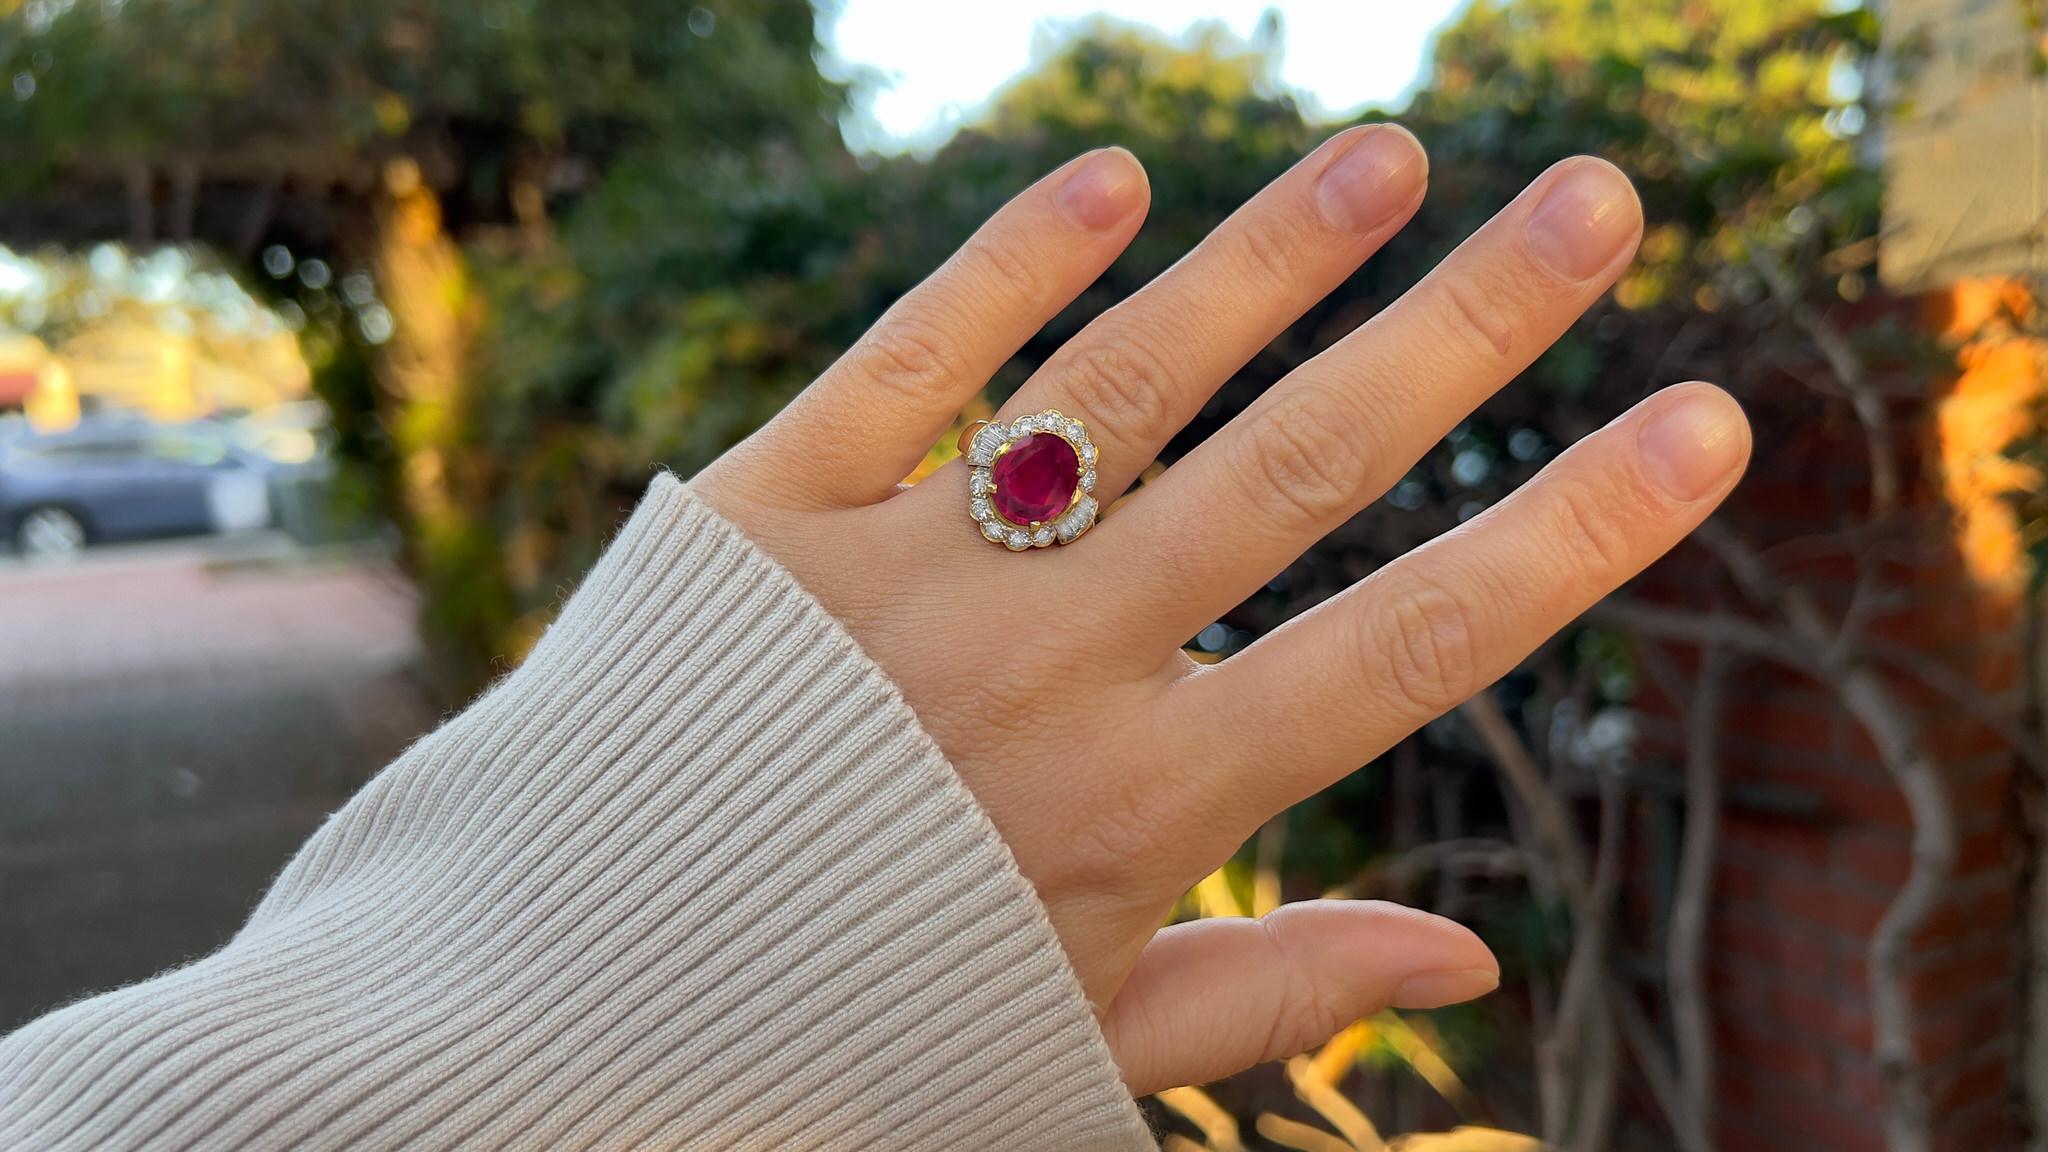 Ruby = 3.80 Carat
(Cut: Oval, Color: Red, Origin: Natural)
Diamond = 1.10 Carats
(Cut: Mixed, Color: G-H, Clarity: VS)
Metal = 18K Yellow Gold
Ring Size = 5